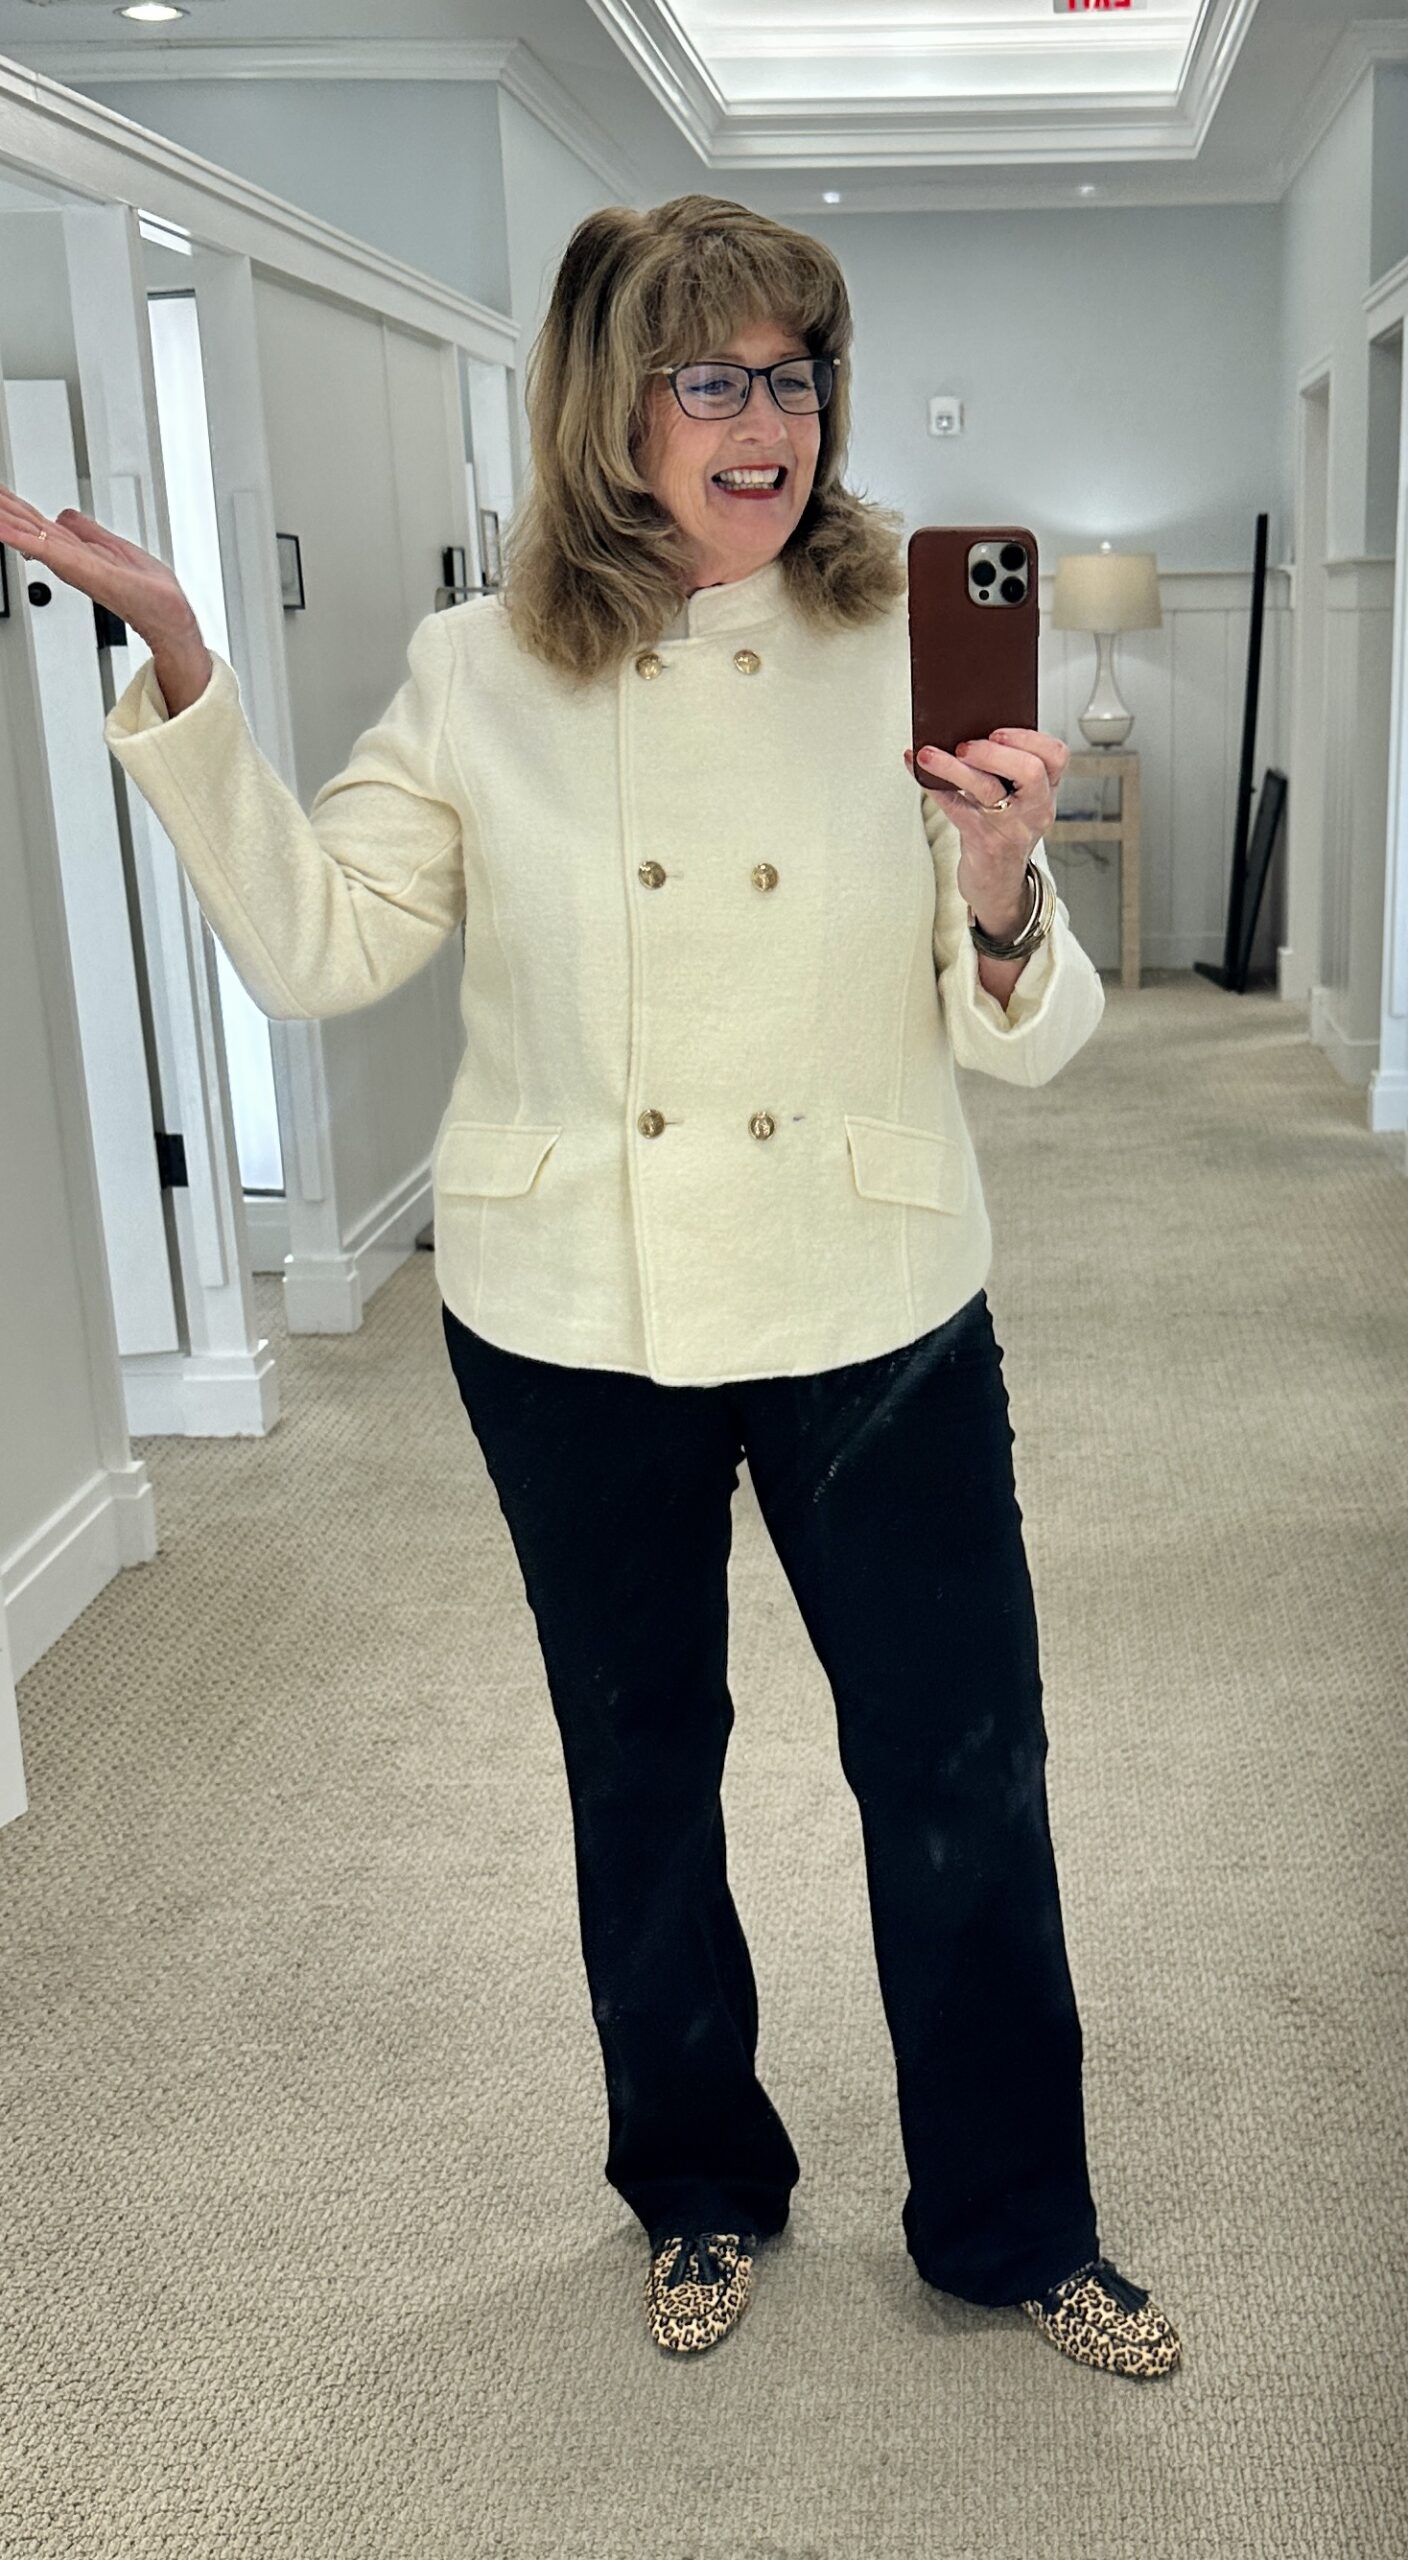 https://over50feeling40.com/wp-content/uploads/2023/10/Chic-and-warm-fall-outfits-in-Talbots-new-collection-scaled.jpg